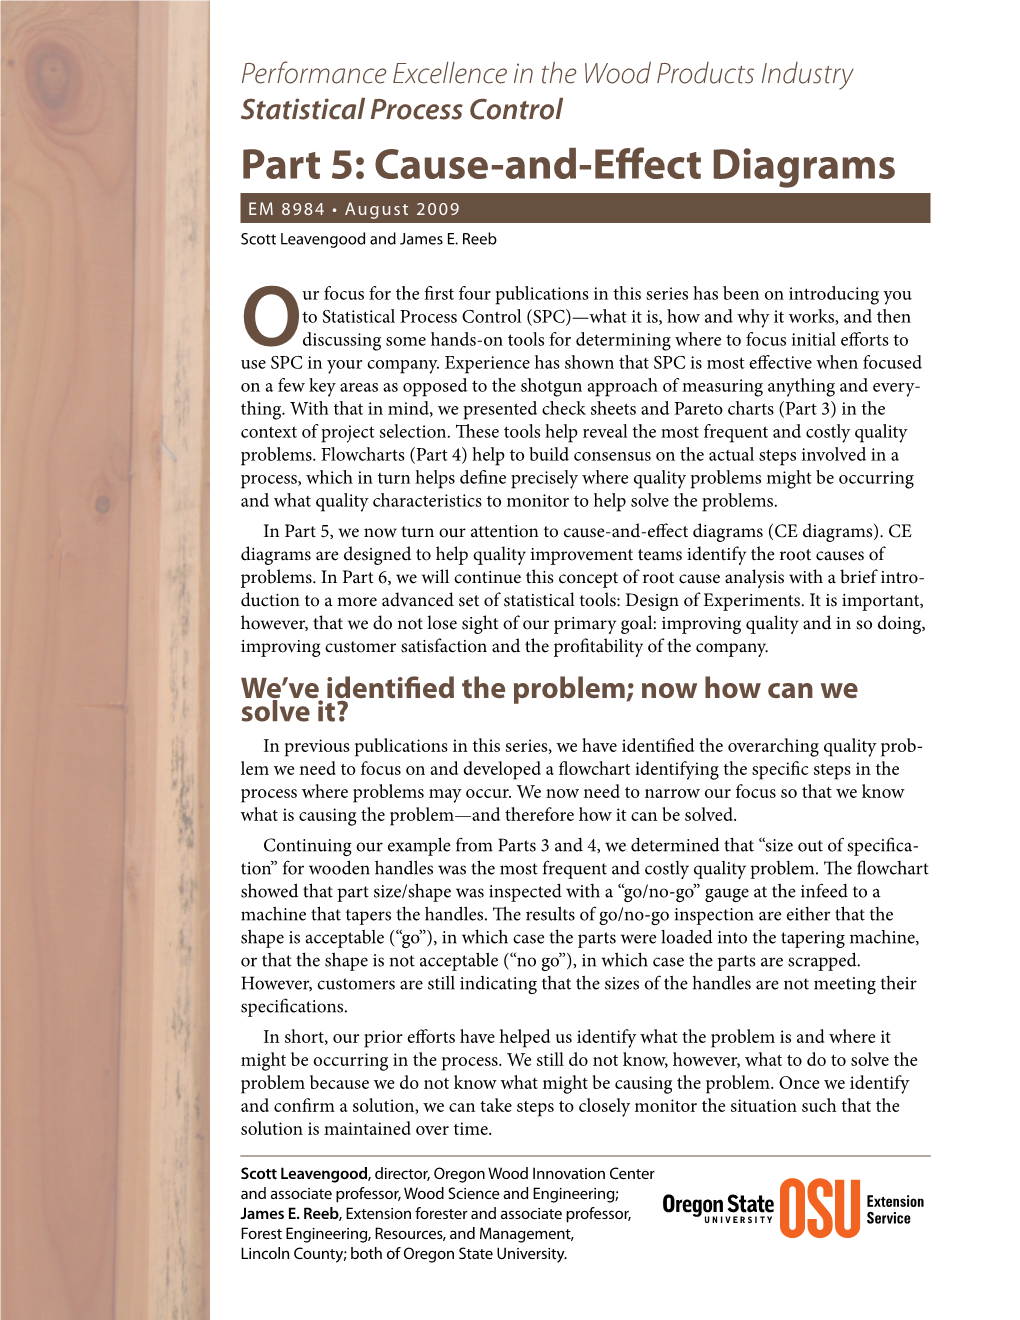 Statistical Process Control, Part 5: Cause-And-Effect Diagrams